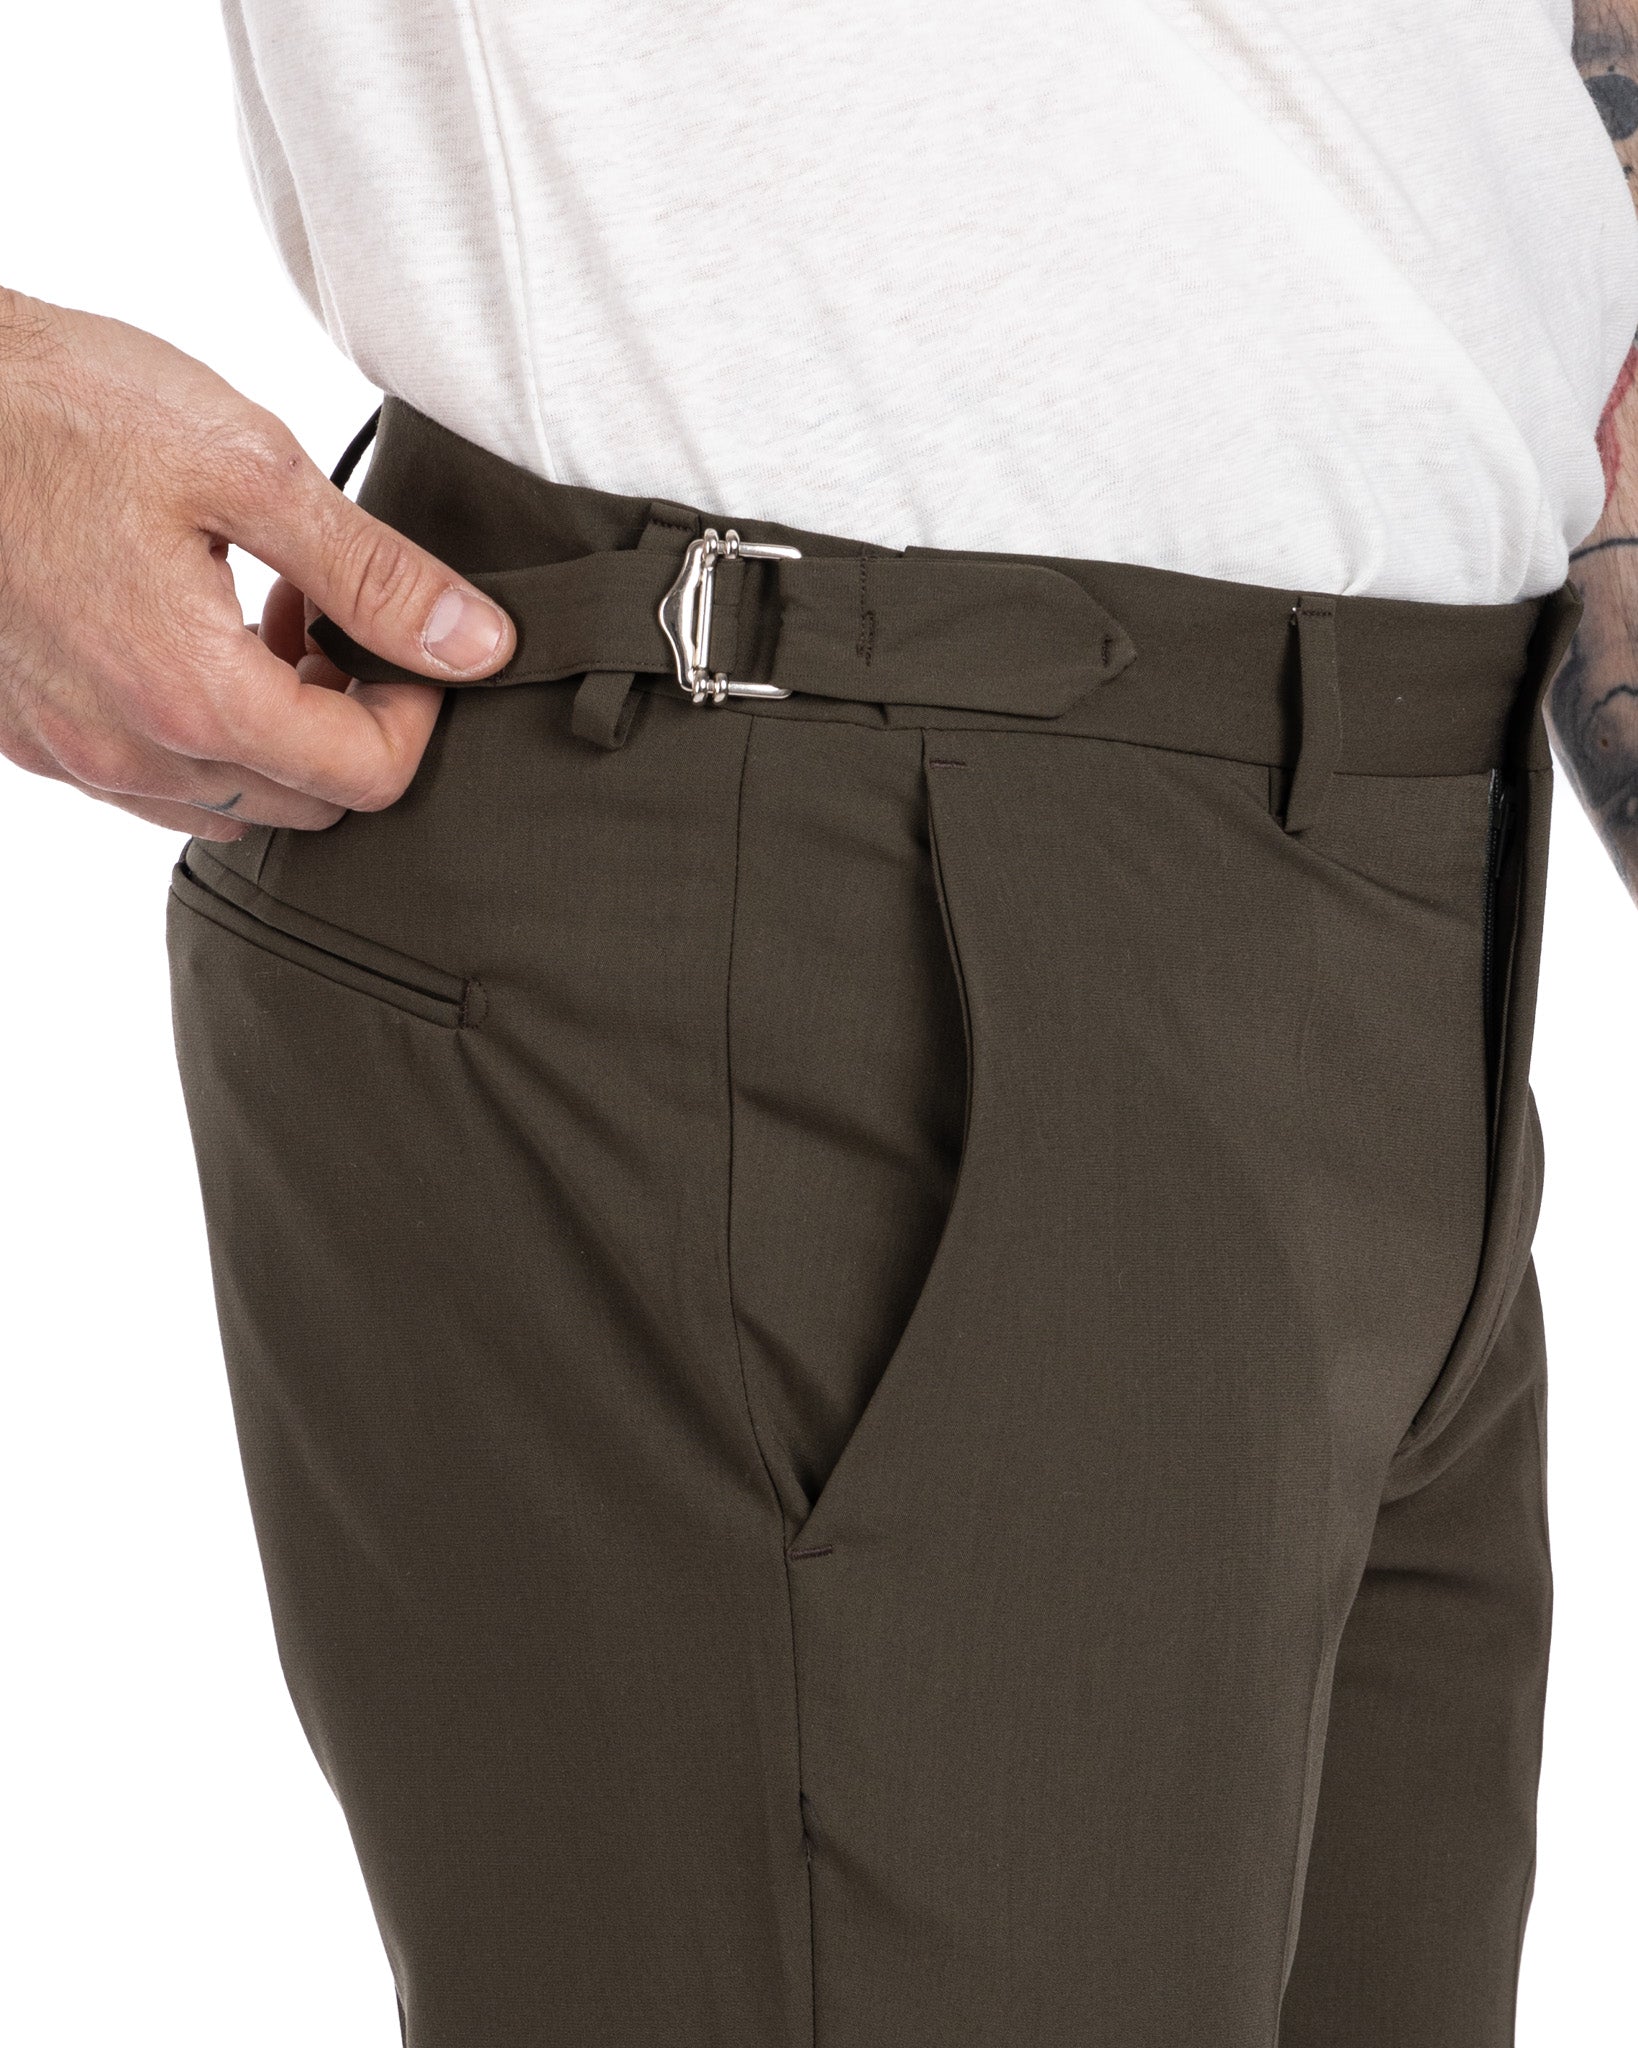 Trani - trousers with military buckles